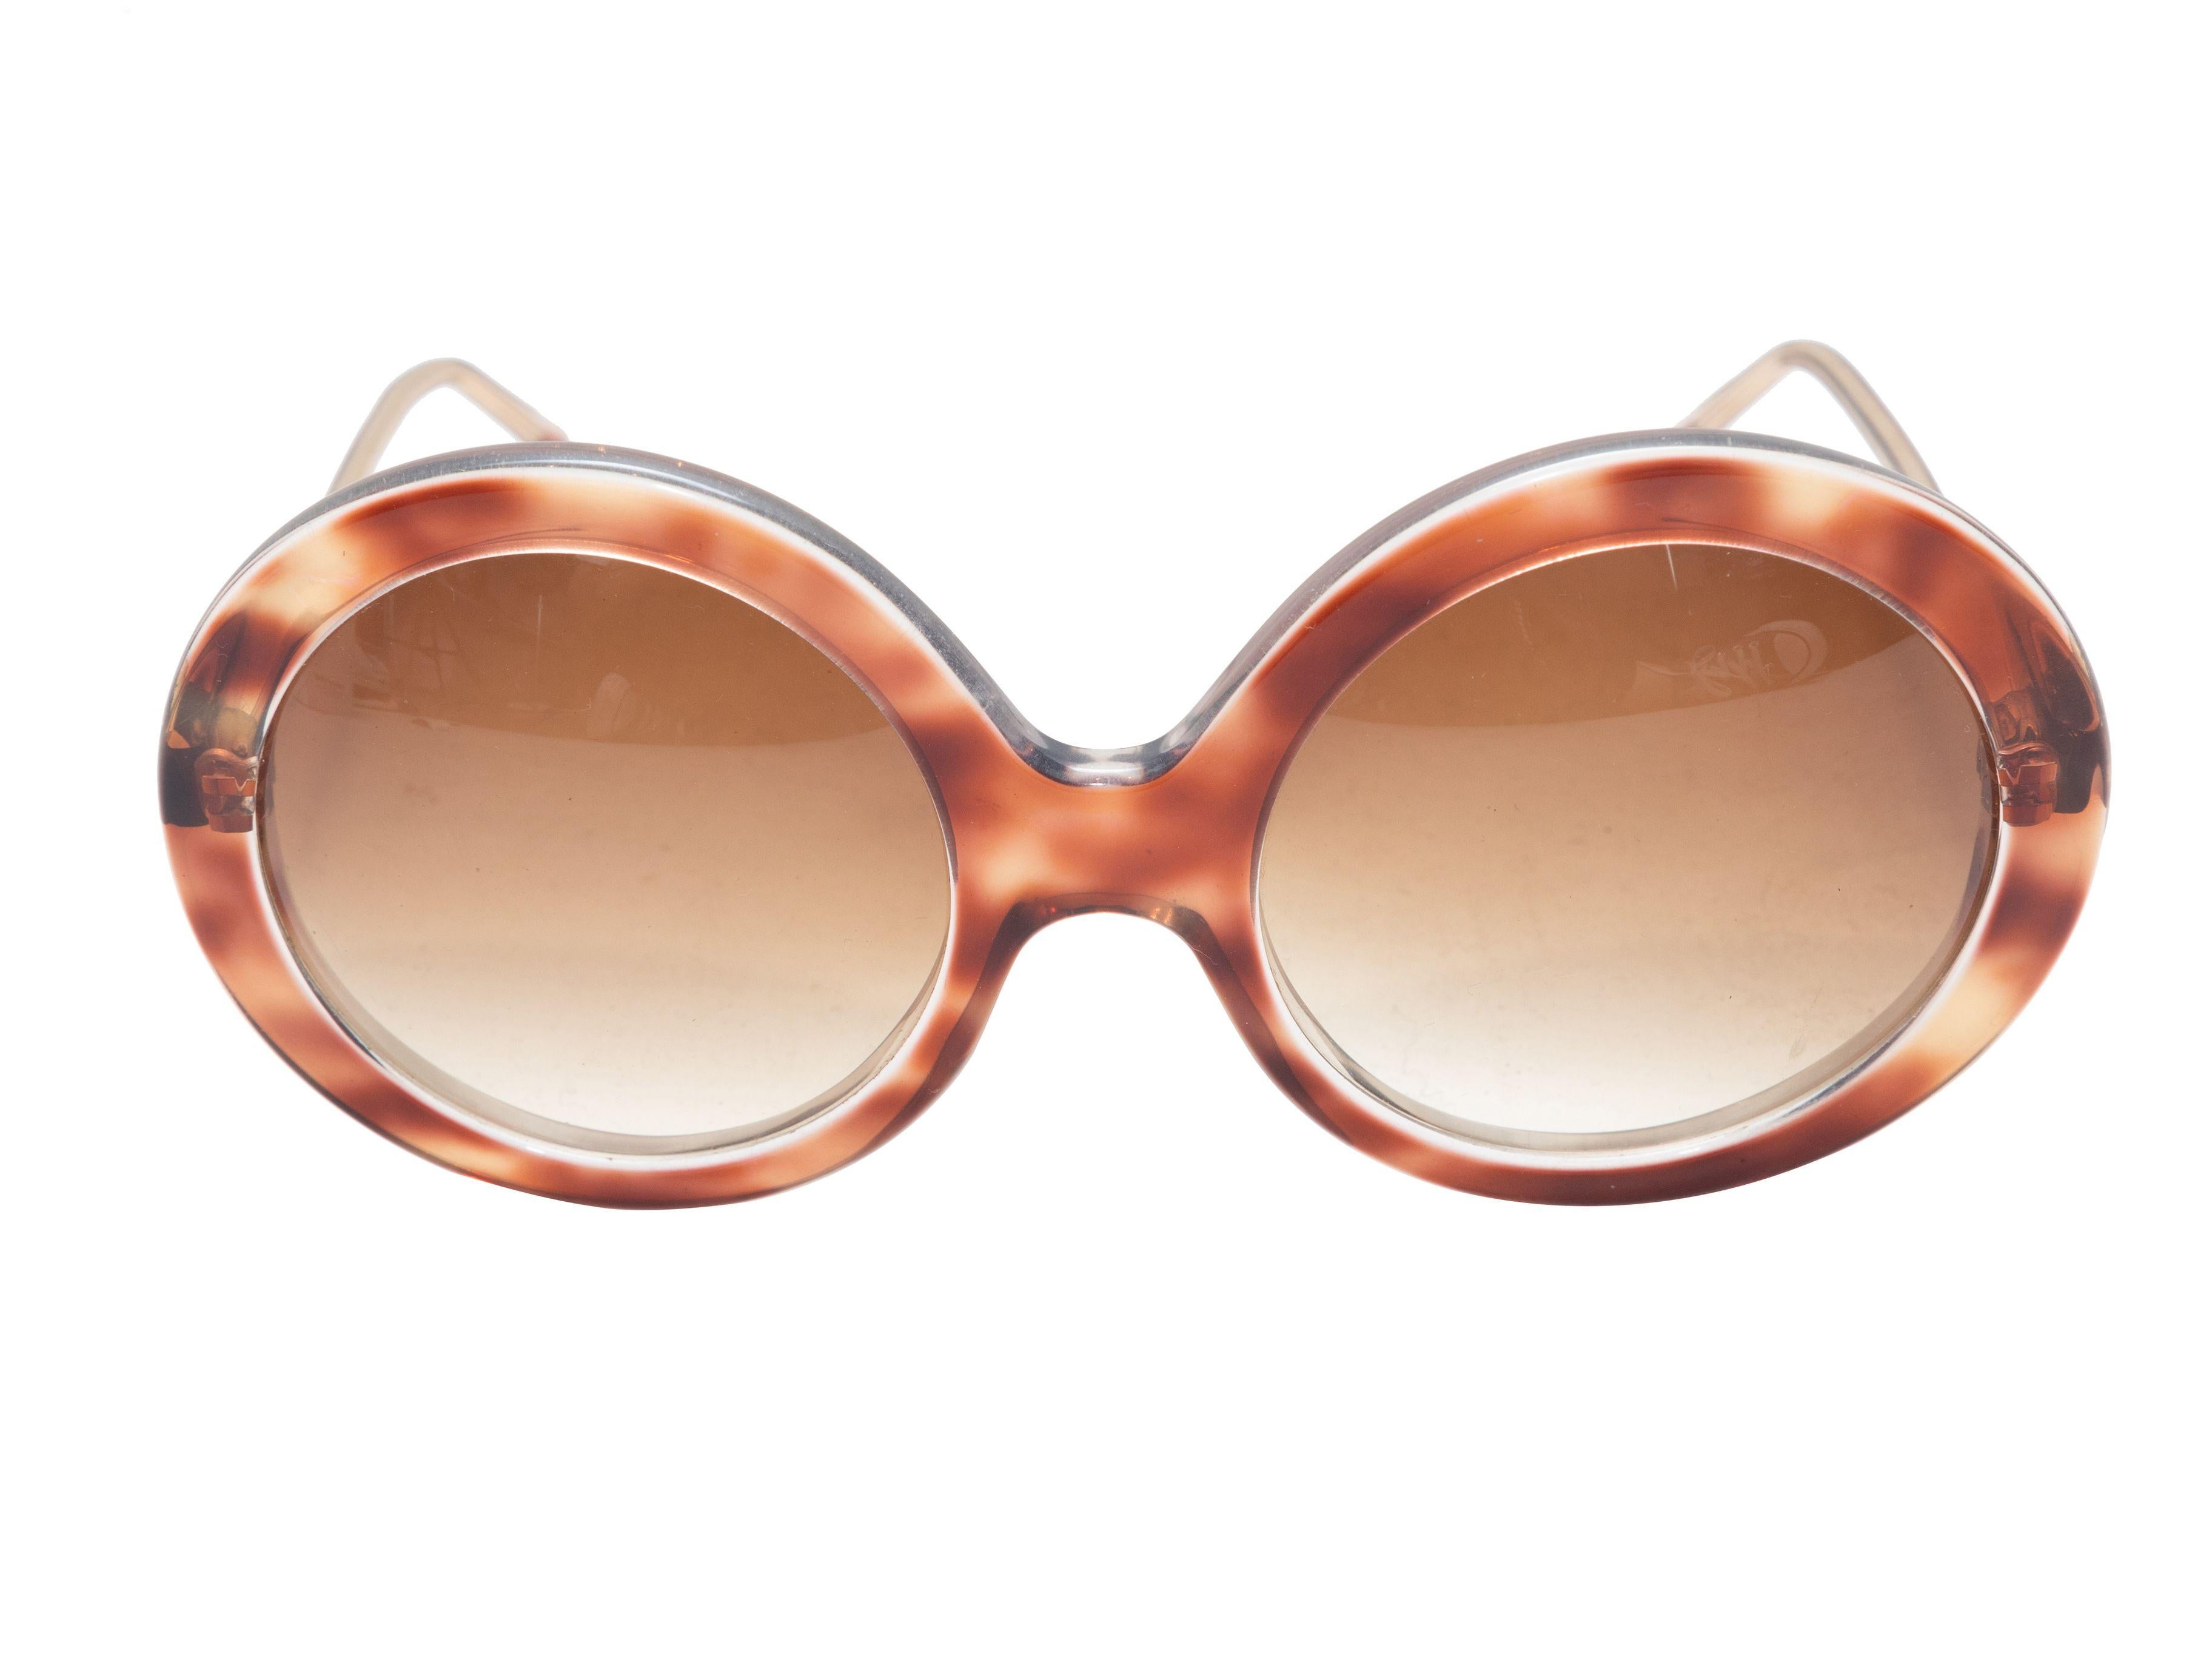 Product Details: Tortoiseshell acetate oversized round sunglasses by Rochas. Brown tinted lenses. 3